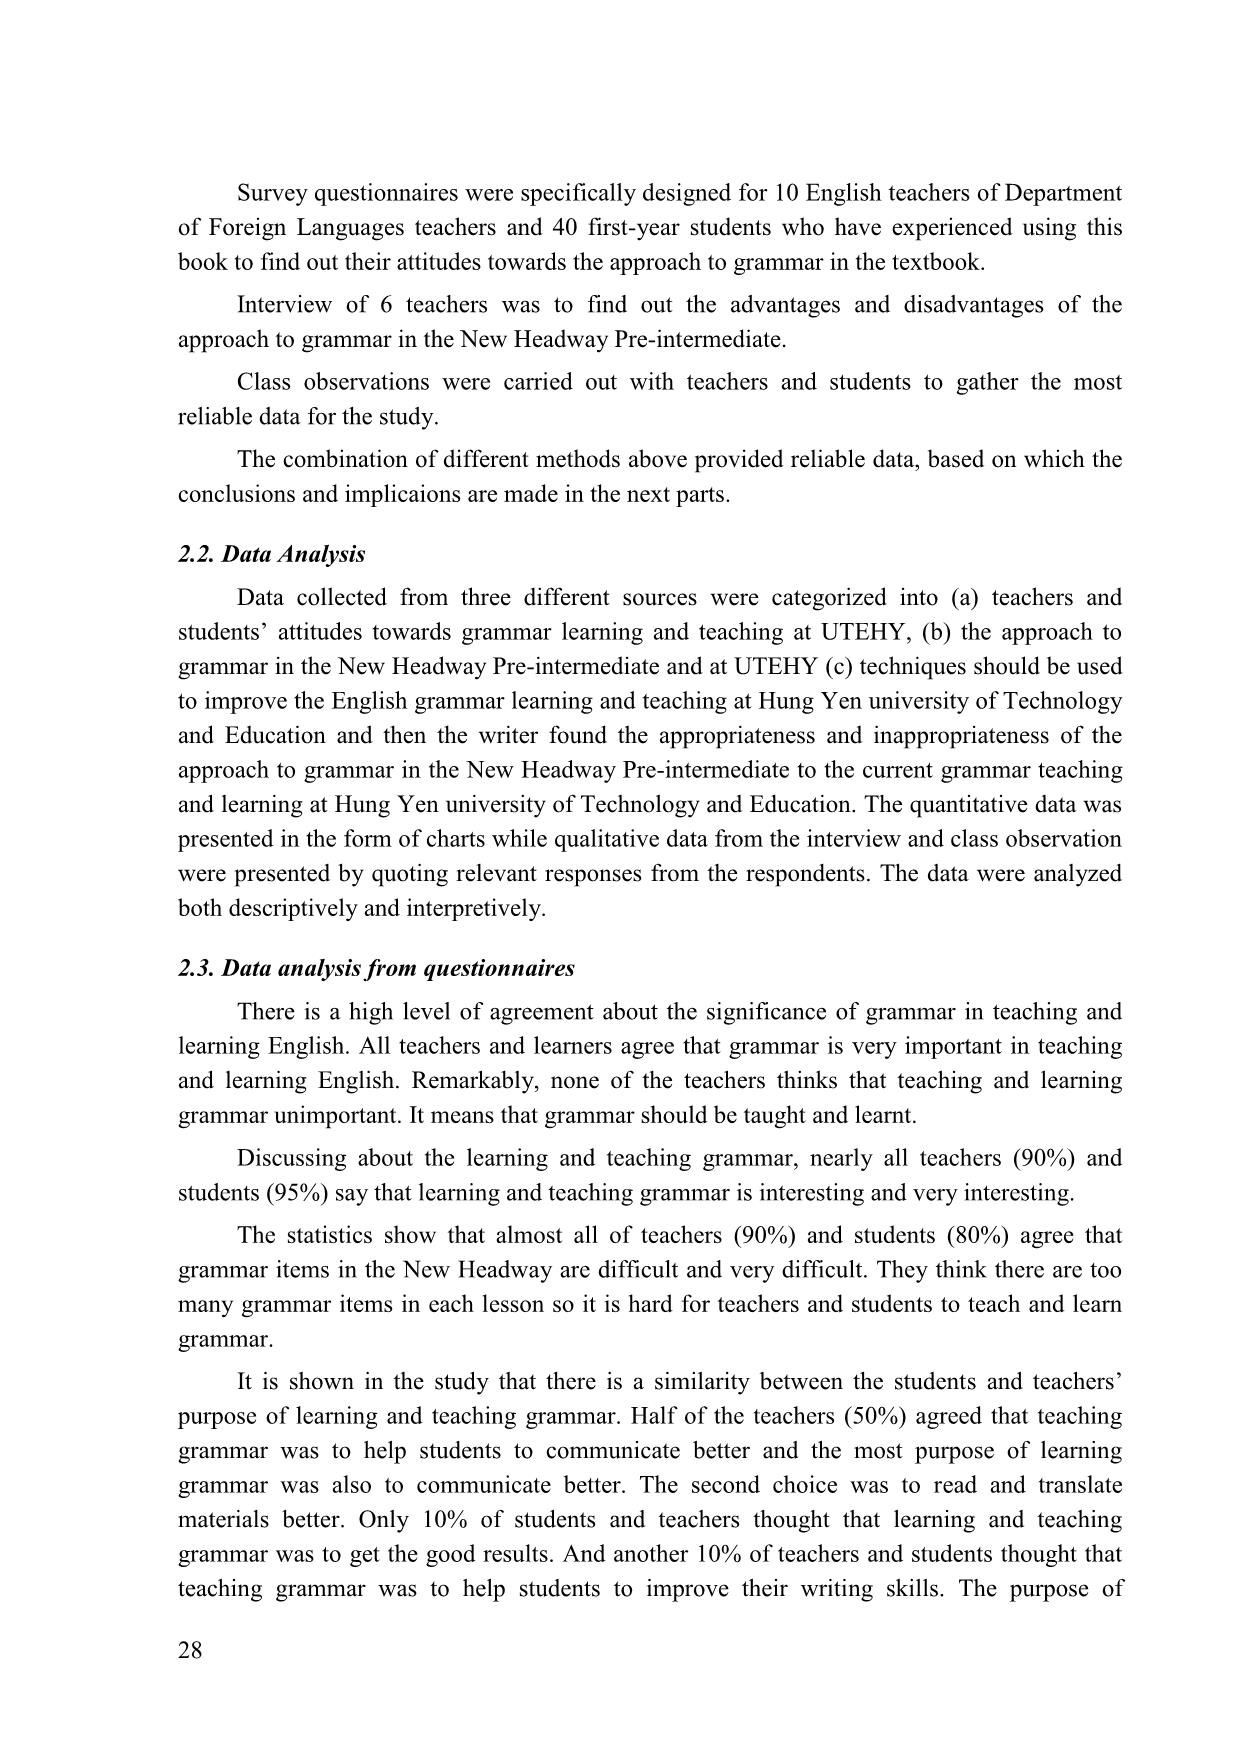 An analysis on grammar approach in the textbook new headway pre-Intermediate and implications for teaching and learning. A cacse study in the department of chemistry and environment of Hung Yen universityof technology and education trang 3